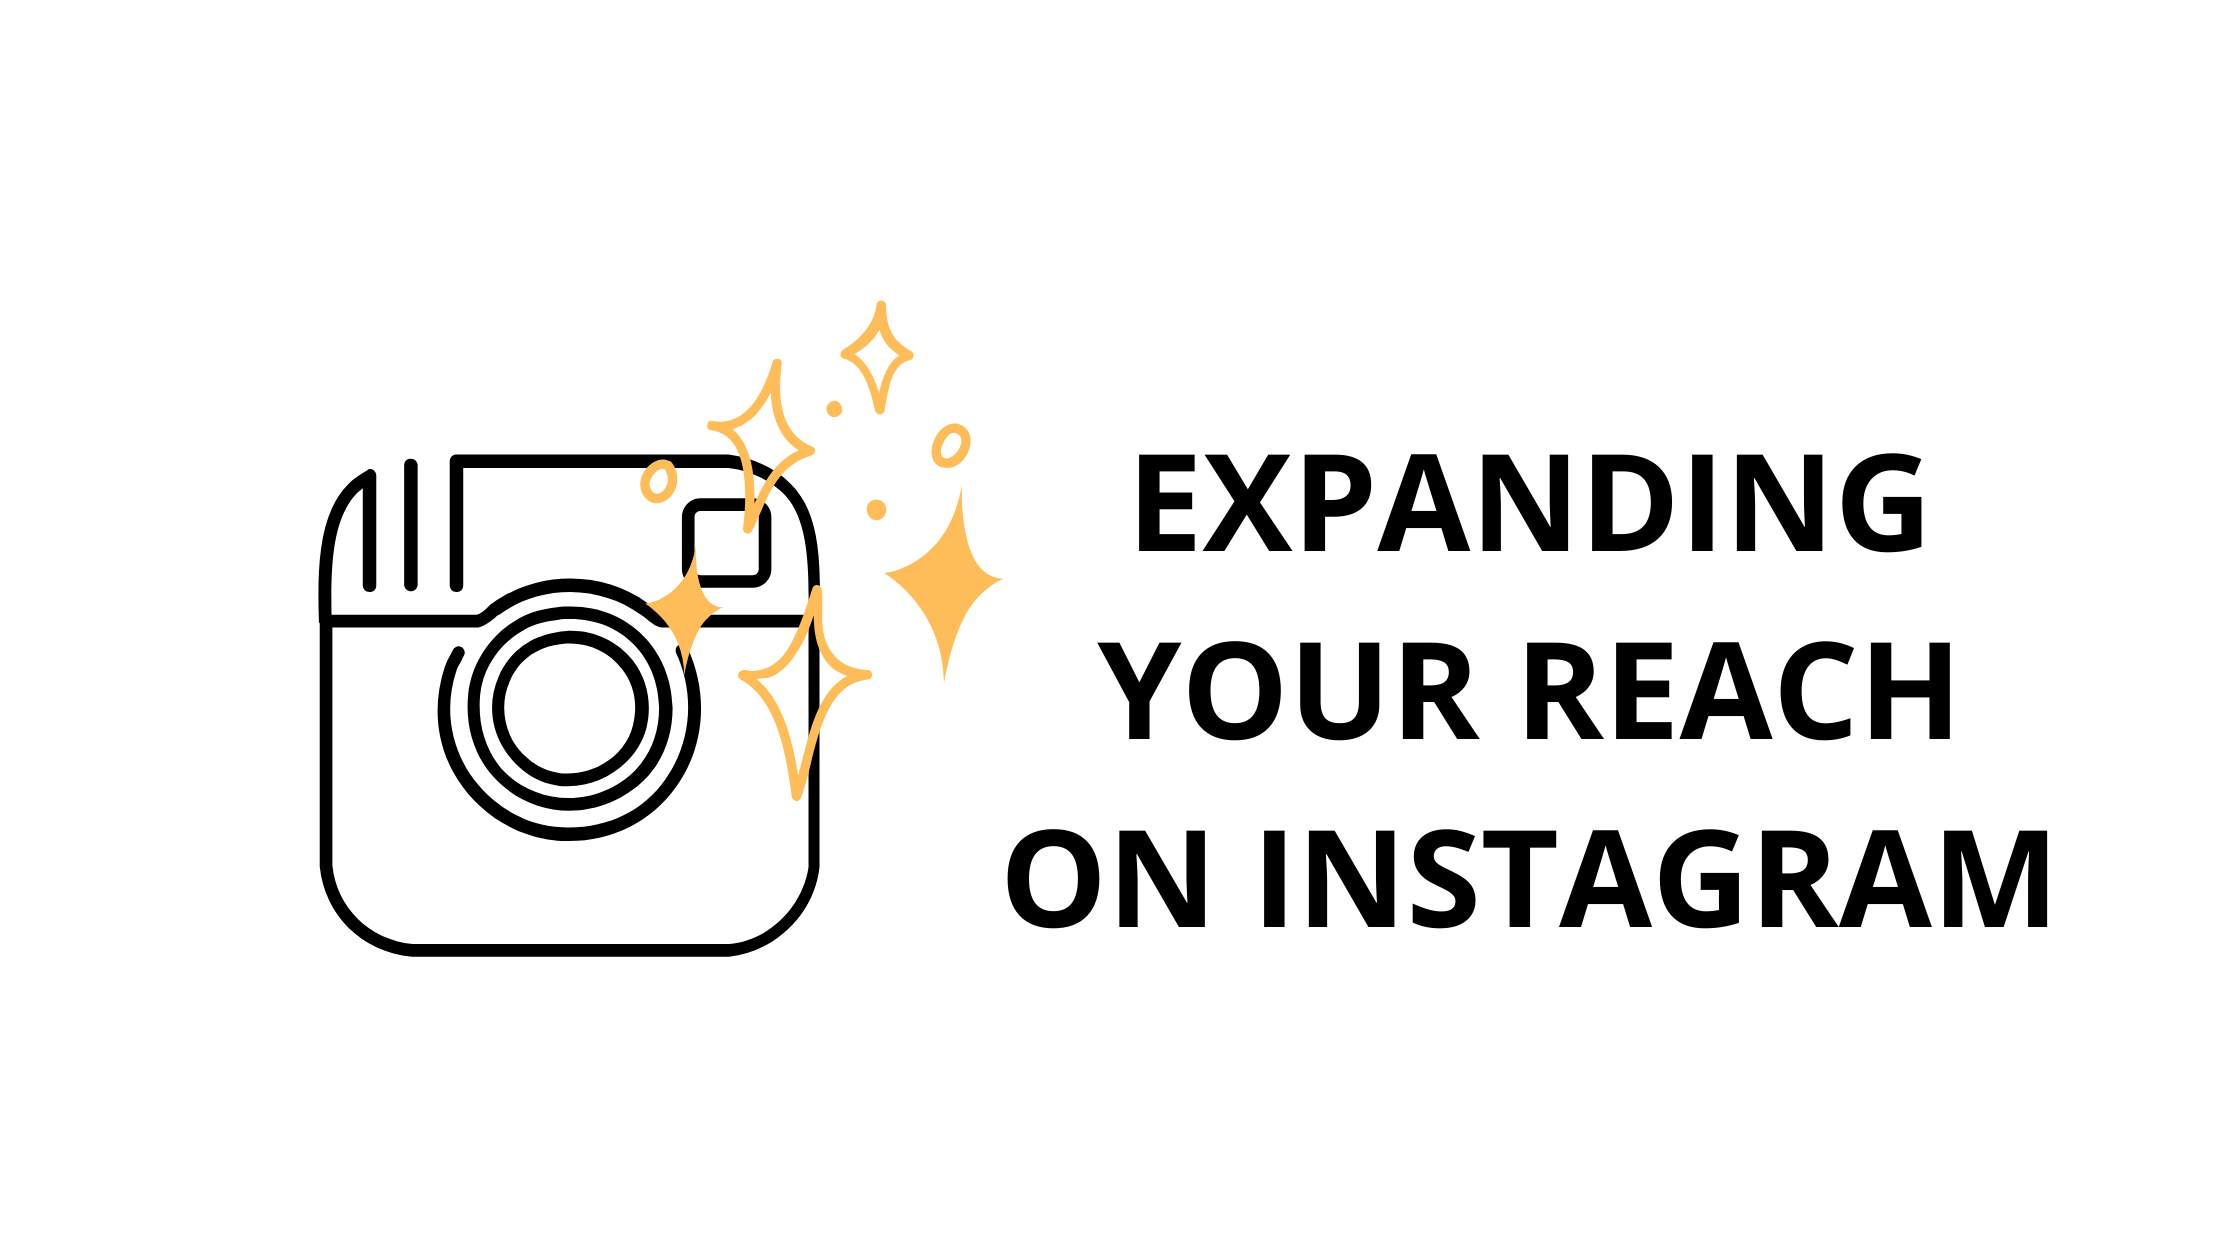 EXPANDING YOUR REACH ON INSTAGRAM